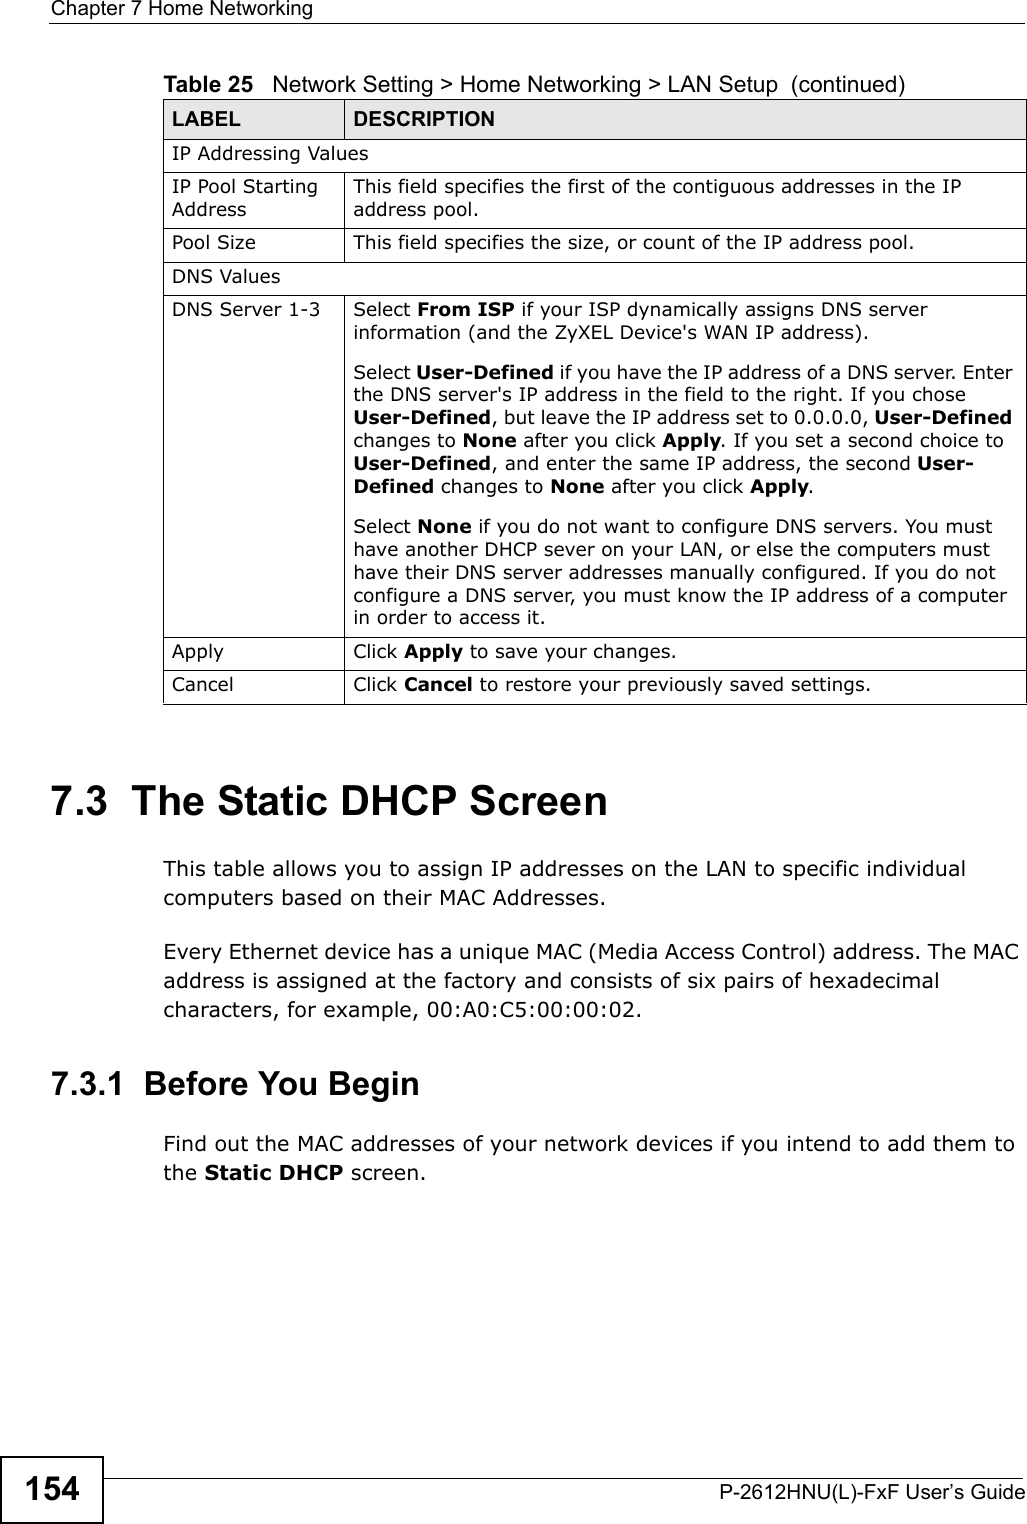 Chapter 7 Home NetworkingP-2612HNU(L)-FxF User’s Guide1547.3  The Static DHCP ScreenThis table allows you to assign IP addresses on the LAN to specific individual computers based on their MAC Addresses.Every Ethernet device has a unique MAC (Media Access Control) address. The MAC address is assigned at the factory and consists of six pairs of hexadecimal characters, for example, 00:A0:C5:00:00:02.7.3.1  Before You BeginFind out the MAC addresses of your network devices if you intend to add them to the Static DHCP screen.IP Addressing ValuesIP Pool StartingAddressThis field specifies the first of the contiguous addresses in the IP address pool.Pool Size This field specifies the size, or count of the IP address pool.DNS ValuesDNS Server 1-3 Select From ISP if your ISP dynamically assigns DNS server information (and the ZyXEL Device&apos;s WAN IP address).Select User-Defined if you have the IP address of a DNS server. Enter the DNS server&apos;s IP address in the field to the right. If you chose User-Defined, but leave the IP address set to 0.0.0.0, User-Definedchanges to None after you click Apply. If you set a second choice to User-Defined, and enter the same IP address, the second User-Defined changes to None after you click Apply. Select None if you do not want to configure DNS servers. You musthave another DHCP sever on your LAN, or else the computers must have their DNS server addresses manually configured. If you do not configure a DNS server, you must know the IP address of a computer in order to access it.Apply Click Apply to save your changes.Cancel Click Cancel to restore your previously saved settings.Table 25   Network Setting &gt; Home Networking &gt; LAN Setup  (continued)LABEL DESCRIPTION